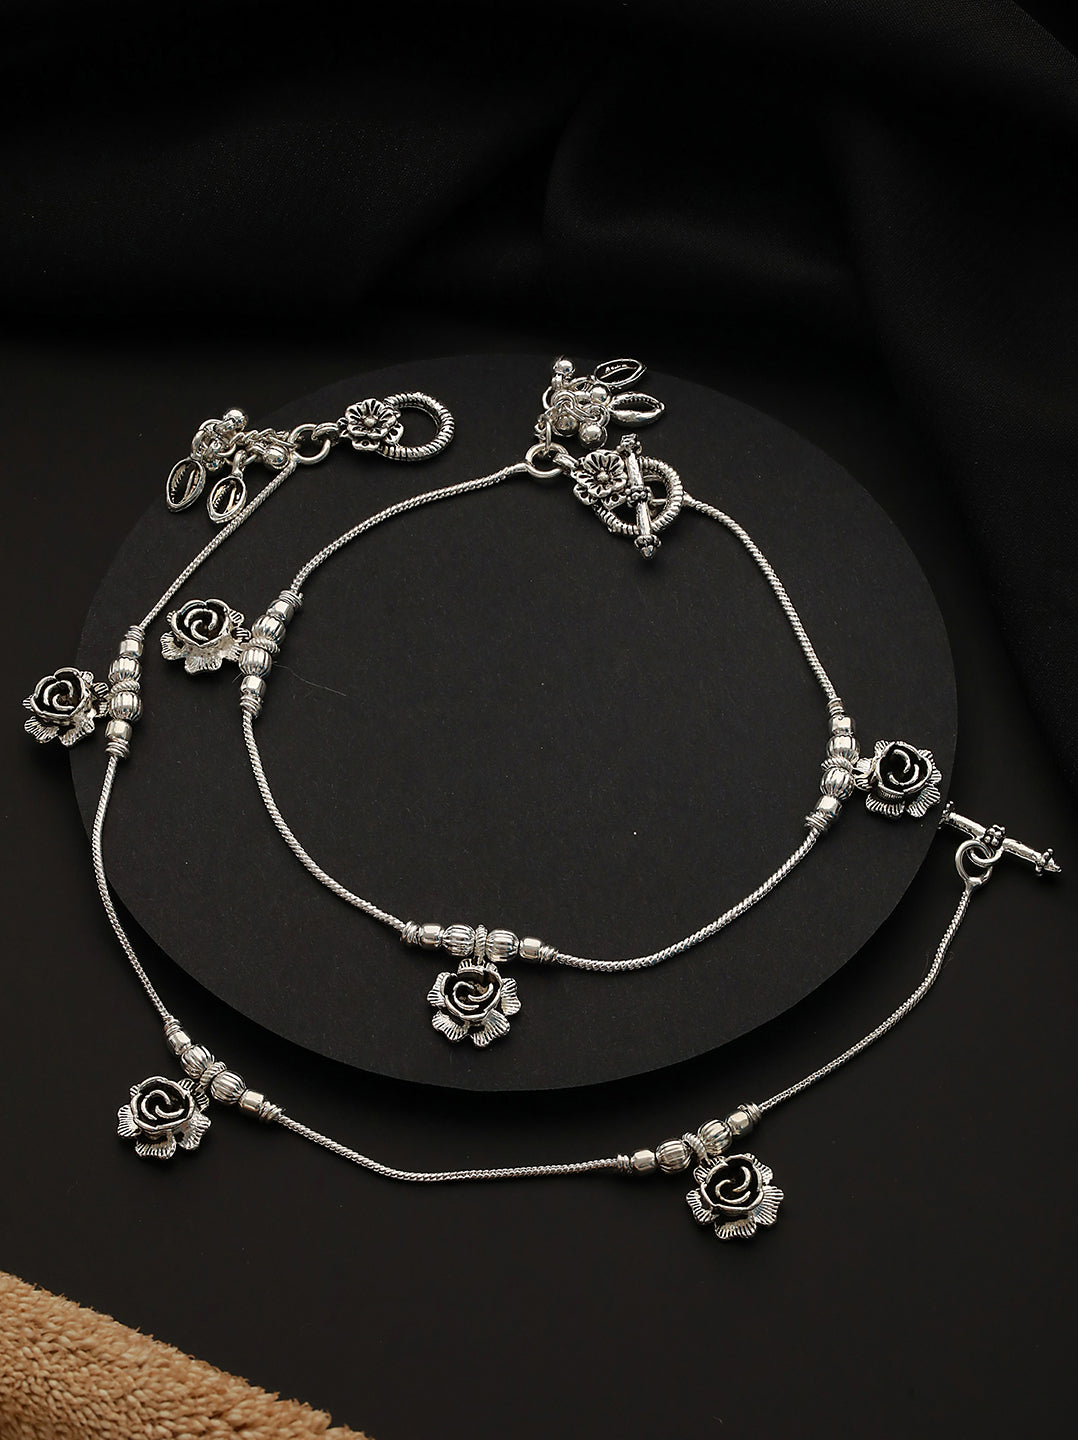 Set of 2 Oxidized Silver-Plated Rose Motif Anklets with Ghungroo Detail